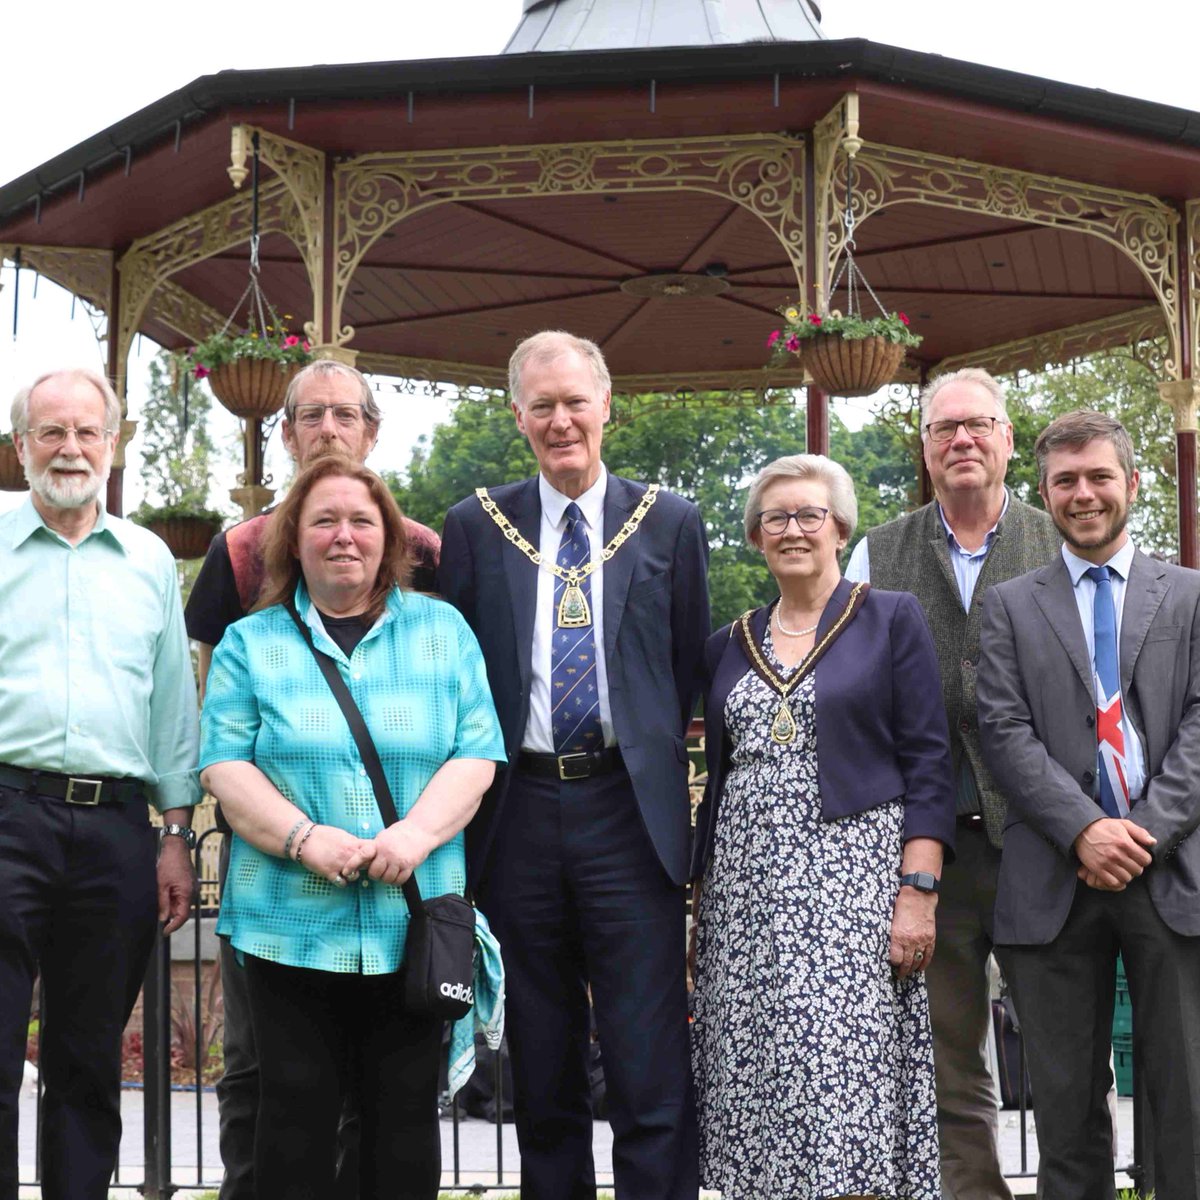 A concert celebrating the successful restoration of the much-loved bandstand in Croydon Rd Recreation Ground #Beckenham, has taken place, with thanks to @mayorofbromley0 and all, particularly @HoltofLondon @becrecfriends @BowiesBecOddity @idverde_Bromley tinyurl.com/57zrrsfe